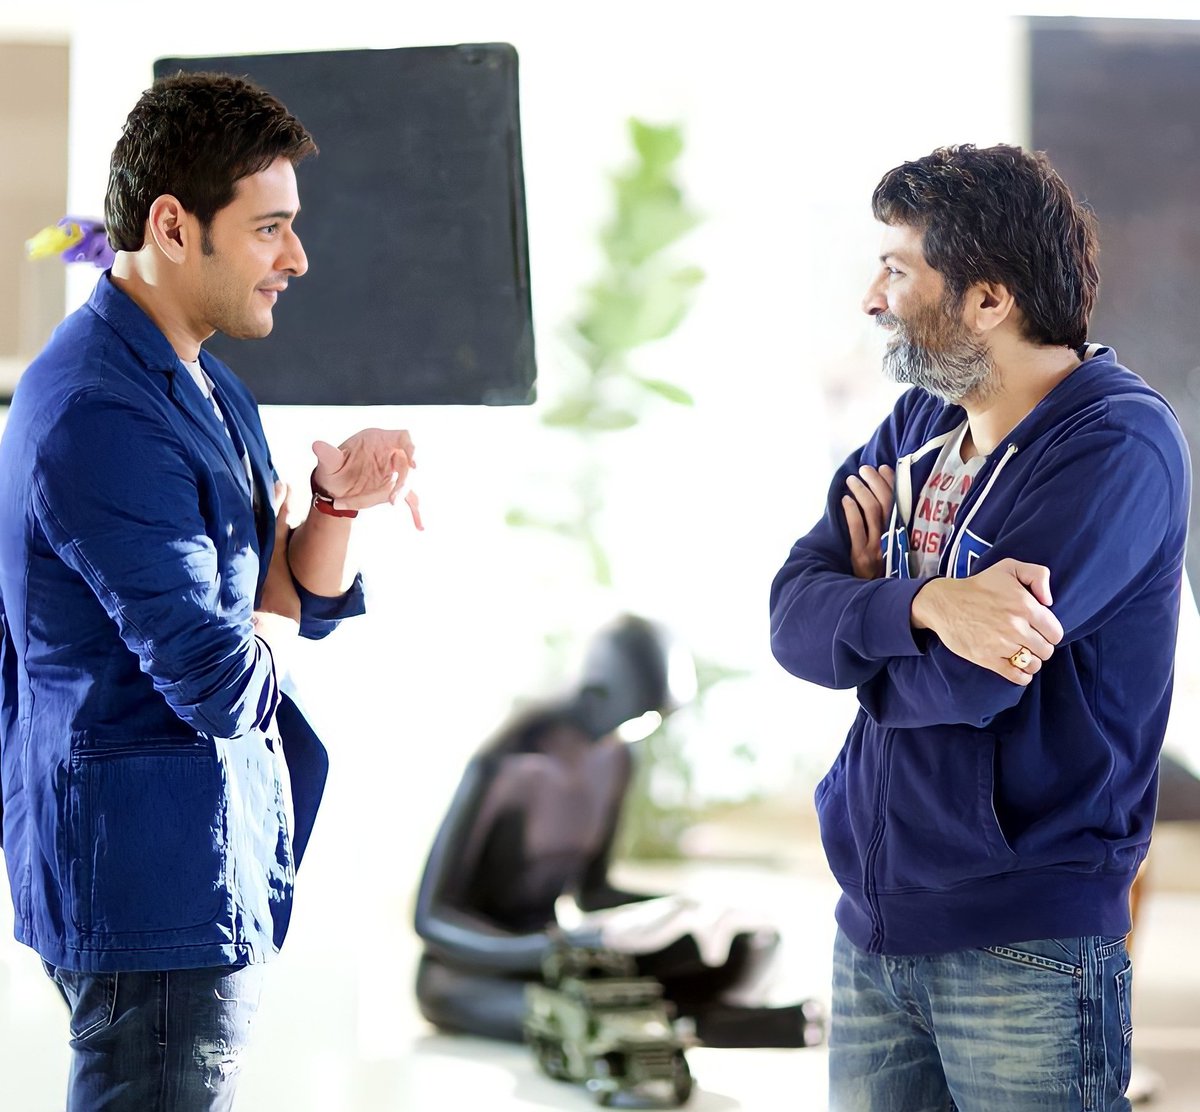 Happy birthday #TrivikramSrinivas.. Wishing you the best of health and success always!! Looking forward to our next :)